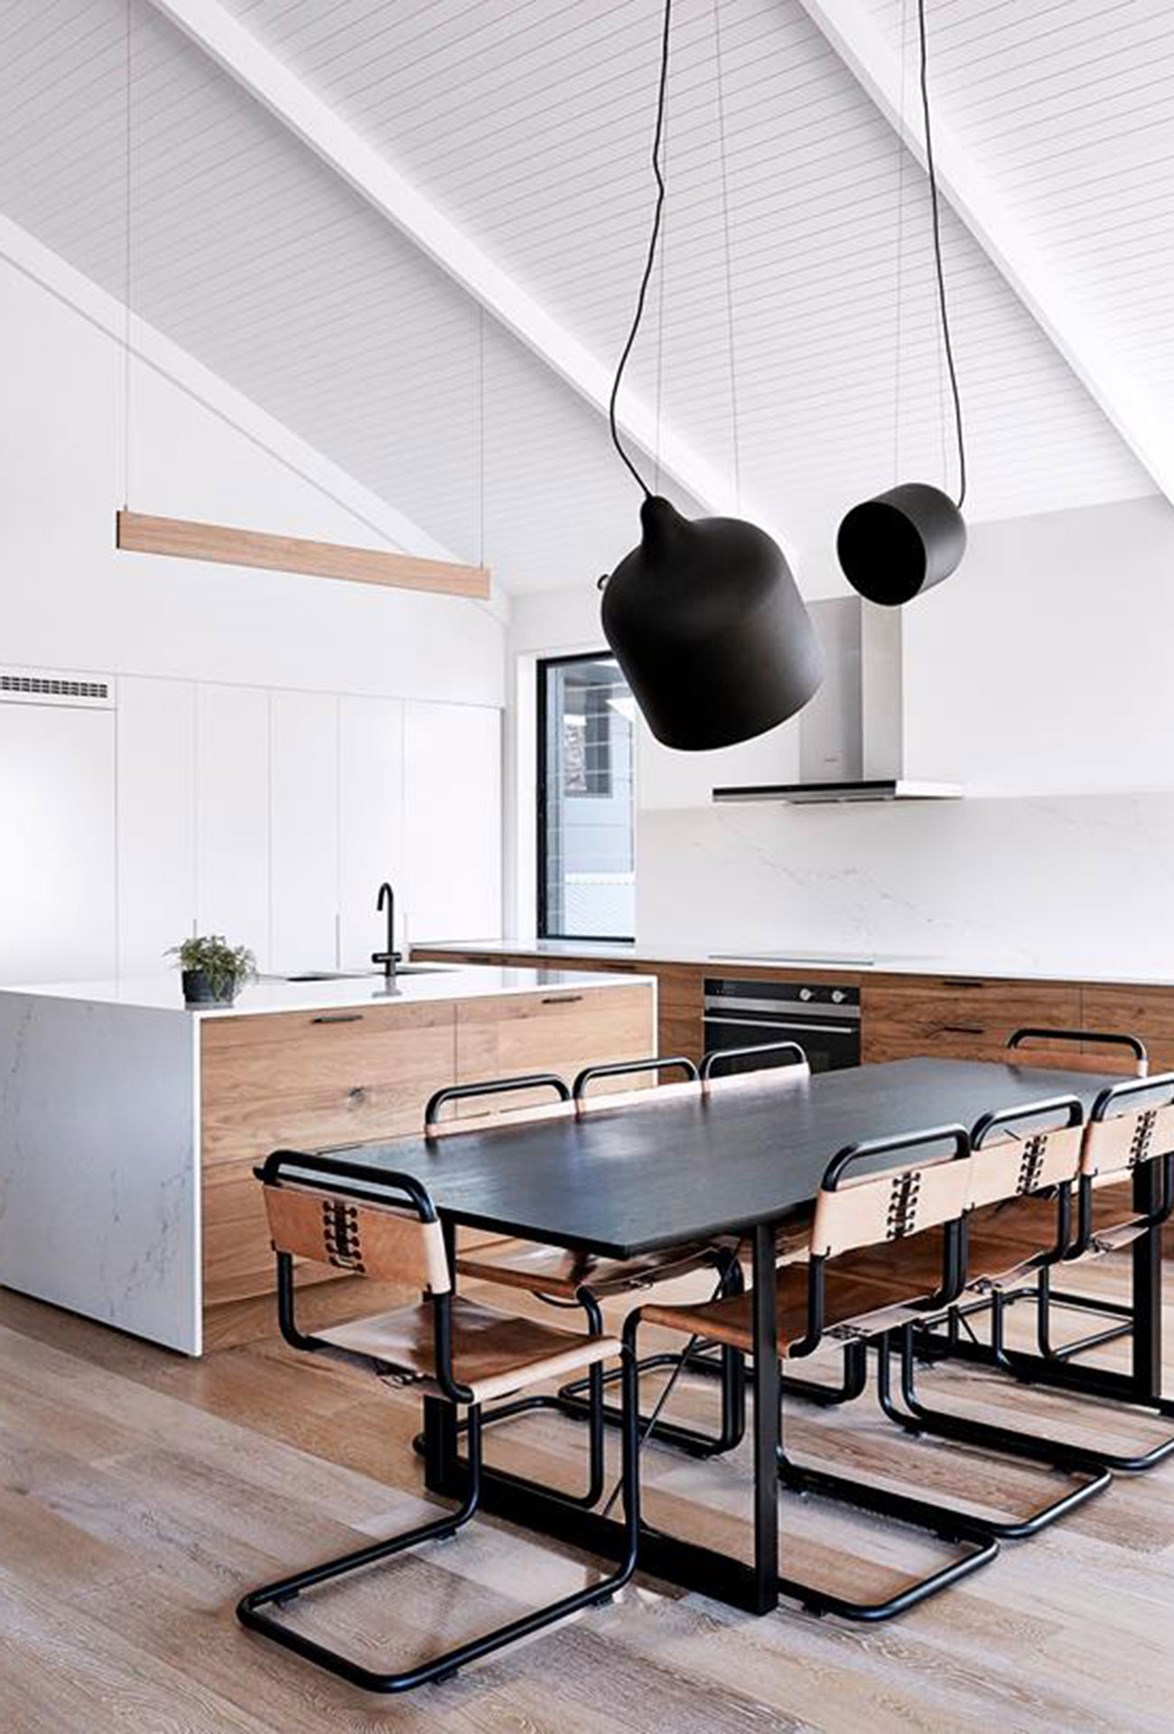 Open-plan kitchens that double as dining rooms are excellent for entertaining. Photo: Terence Chin